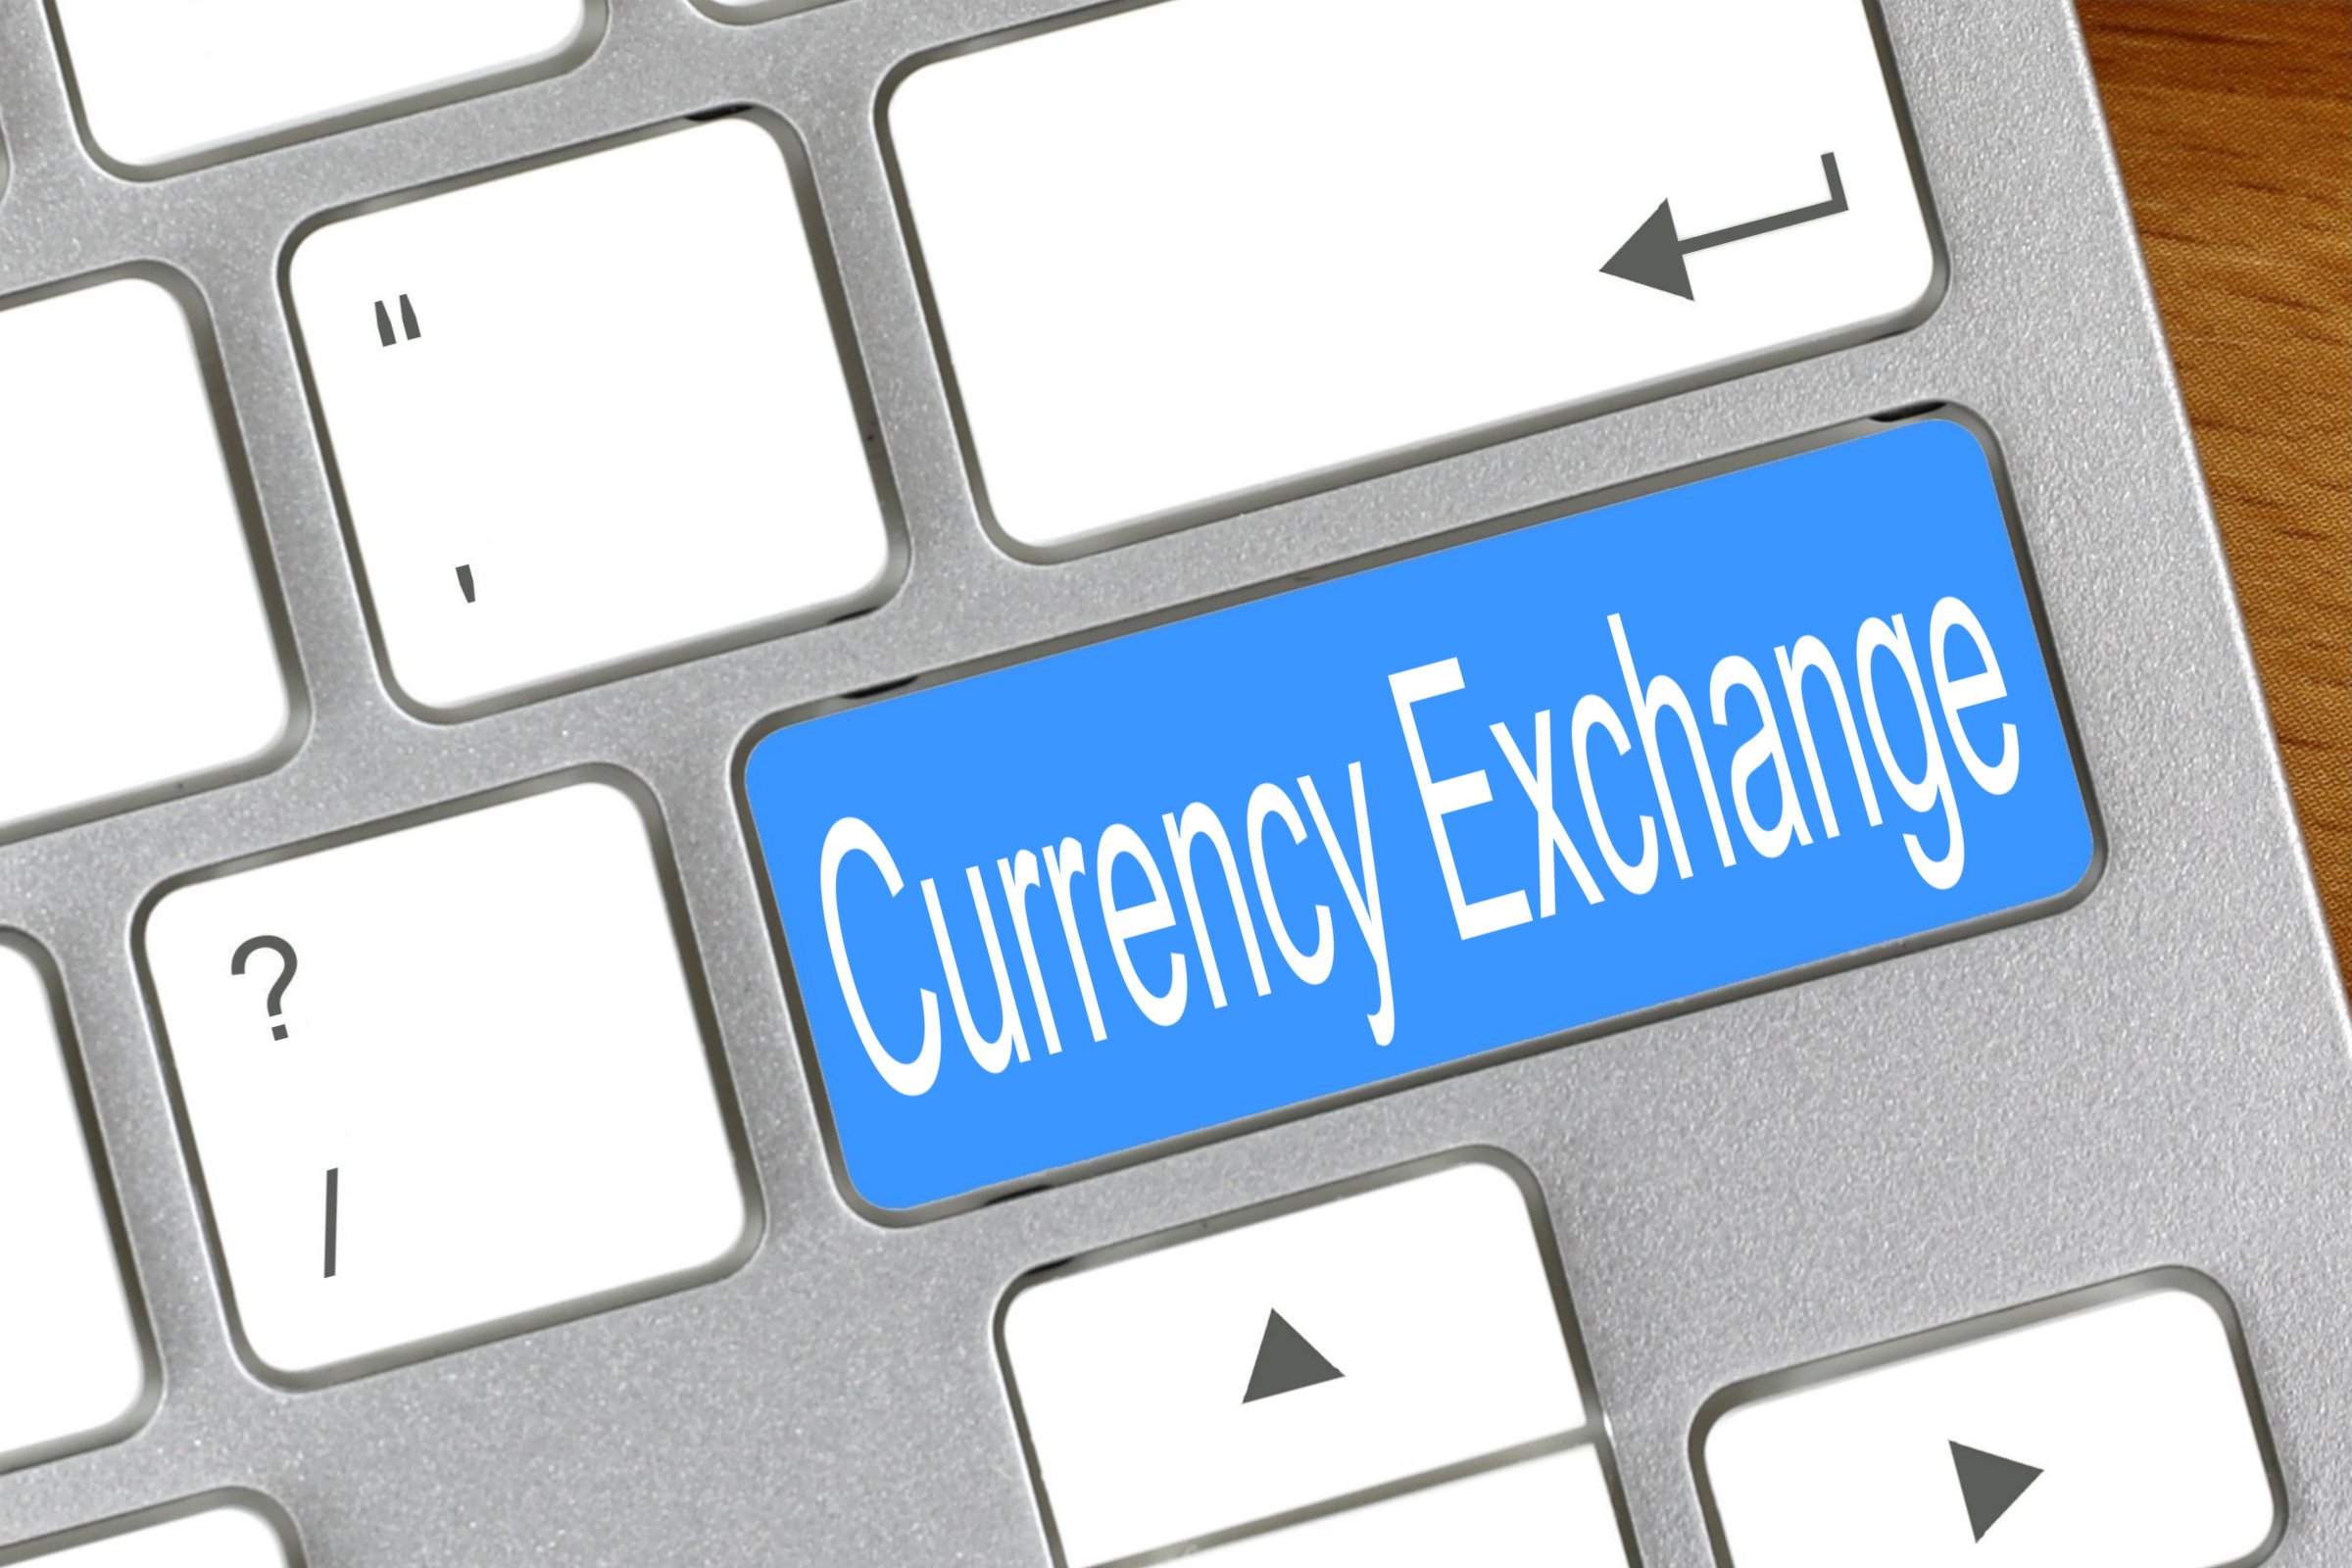 currency exchange